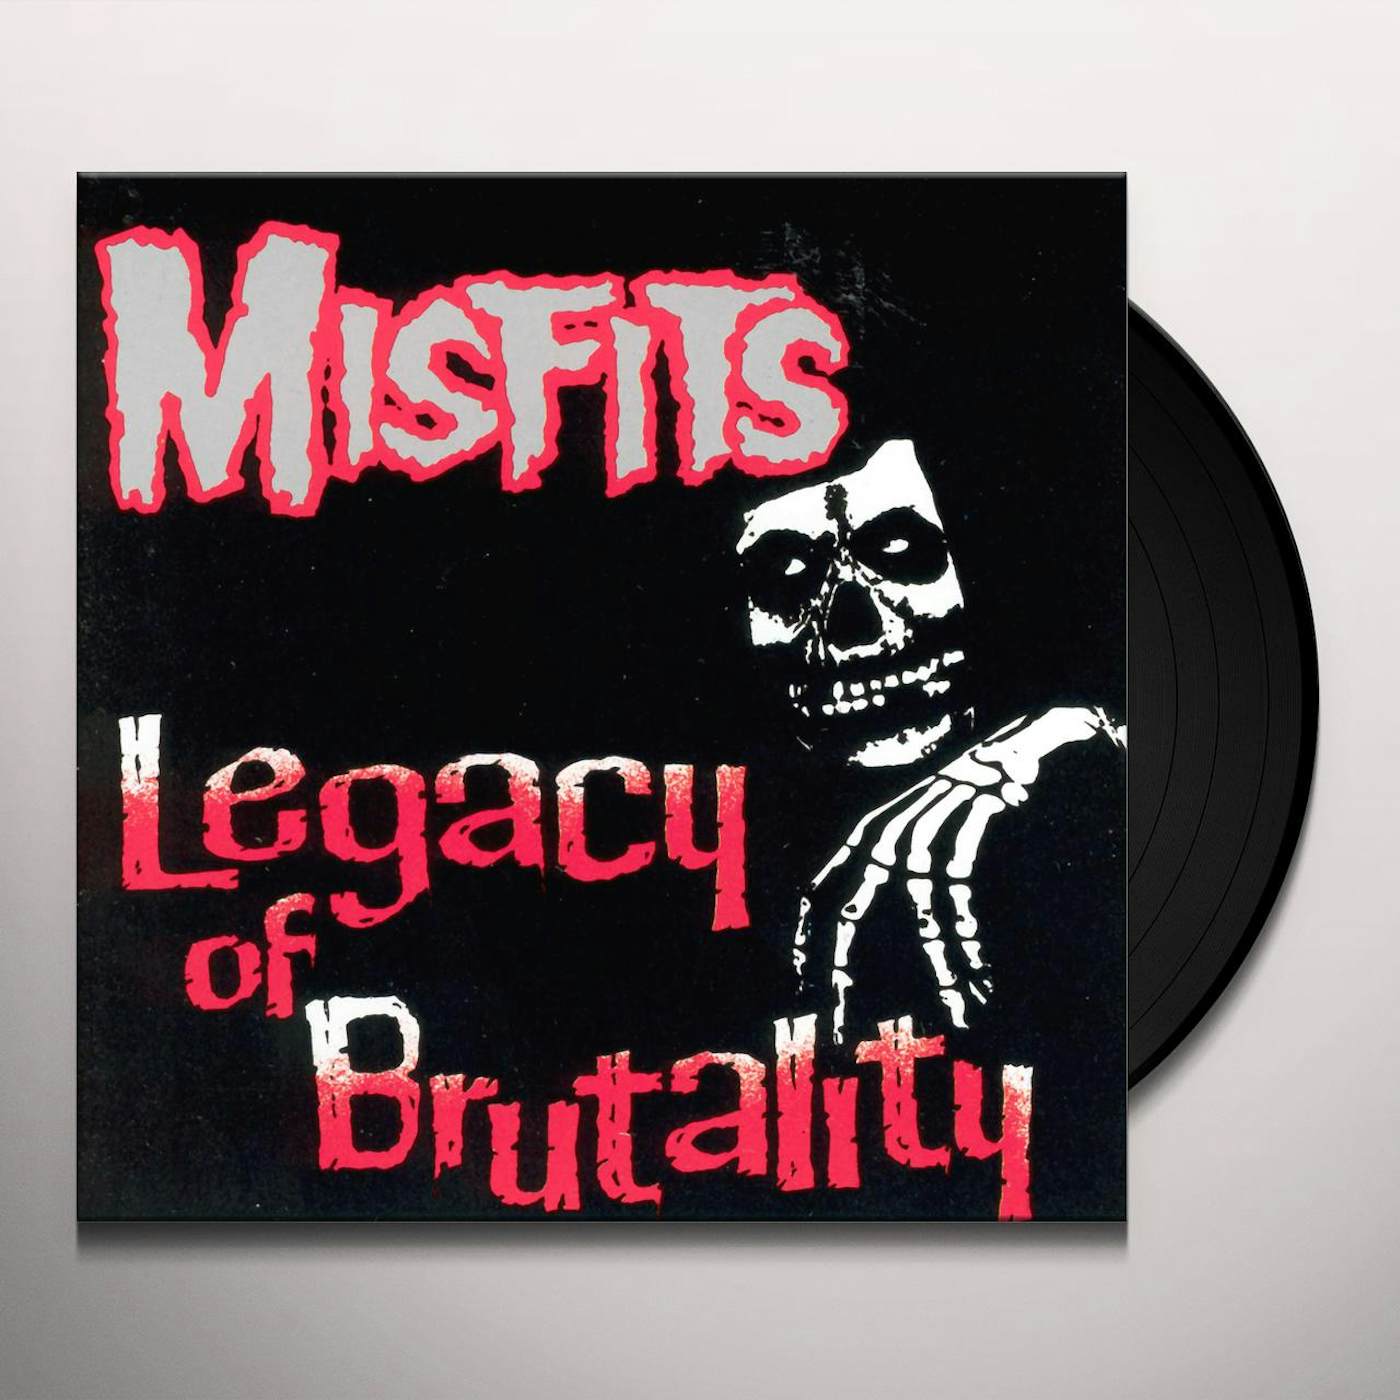 Misfits Collection 2 Cloth Patch – Red Zone